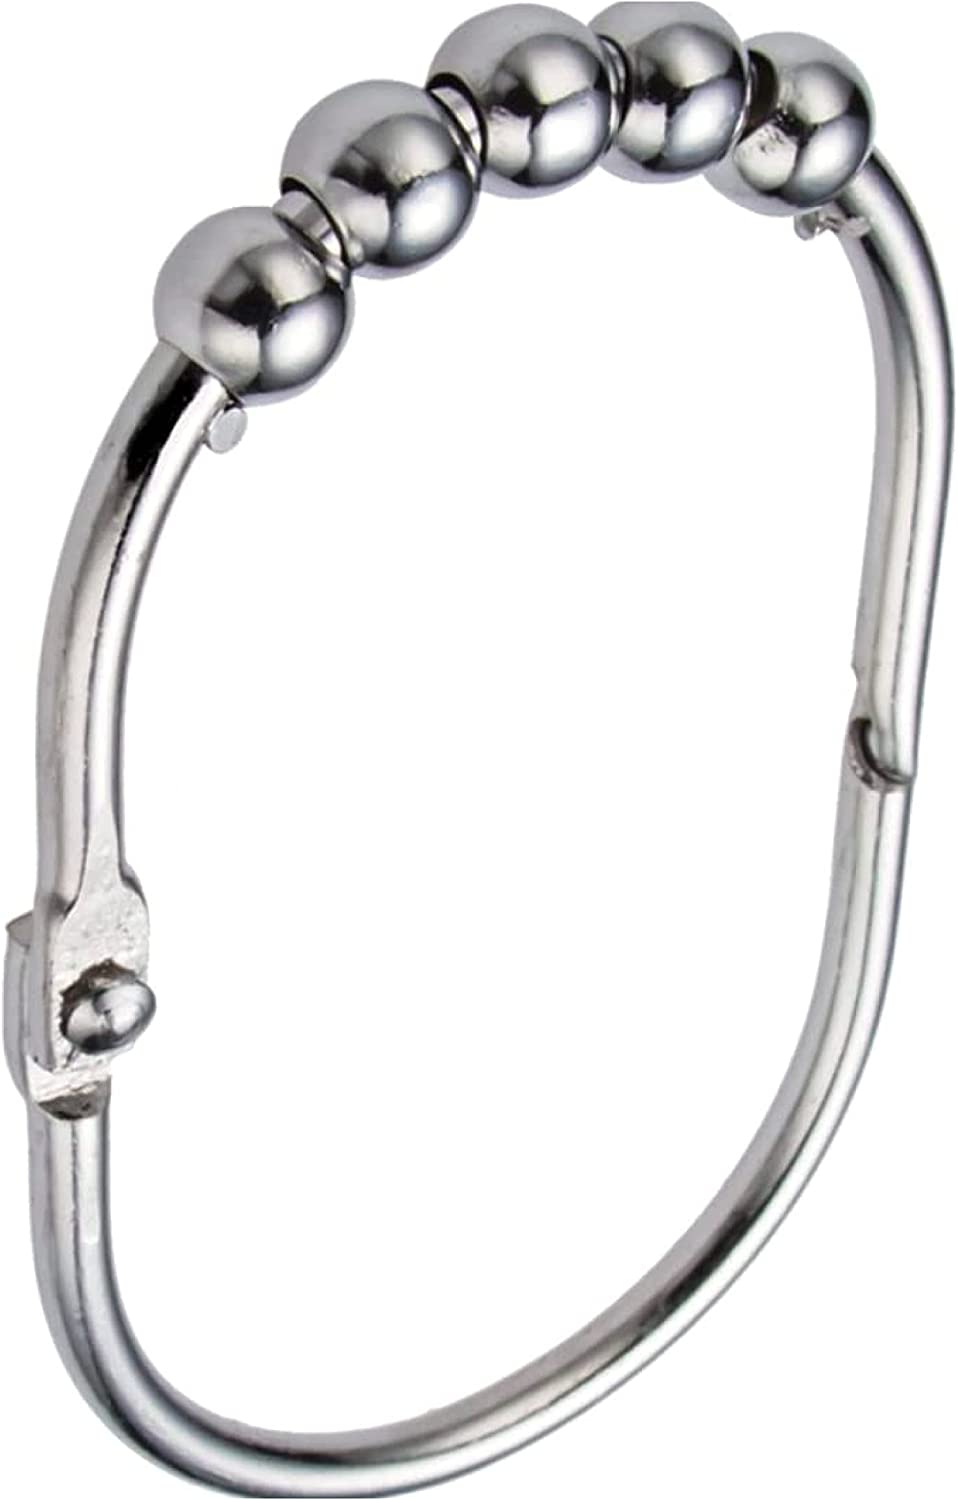 Chrome Shower Curtain Rings - Easy Glide, Decorative